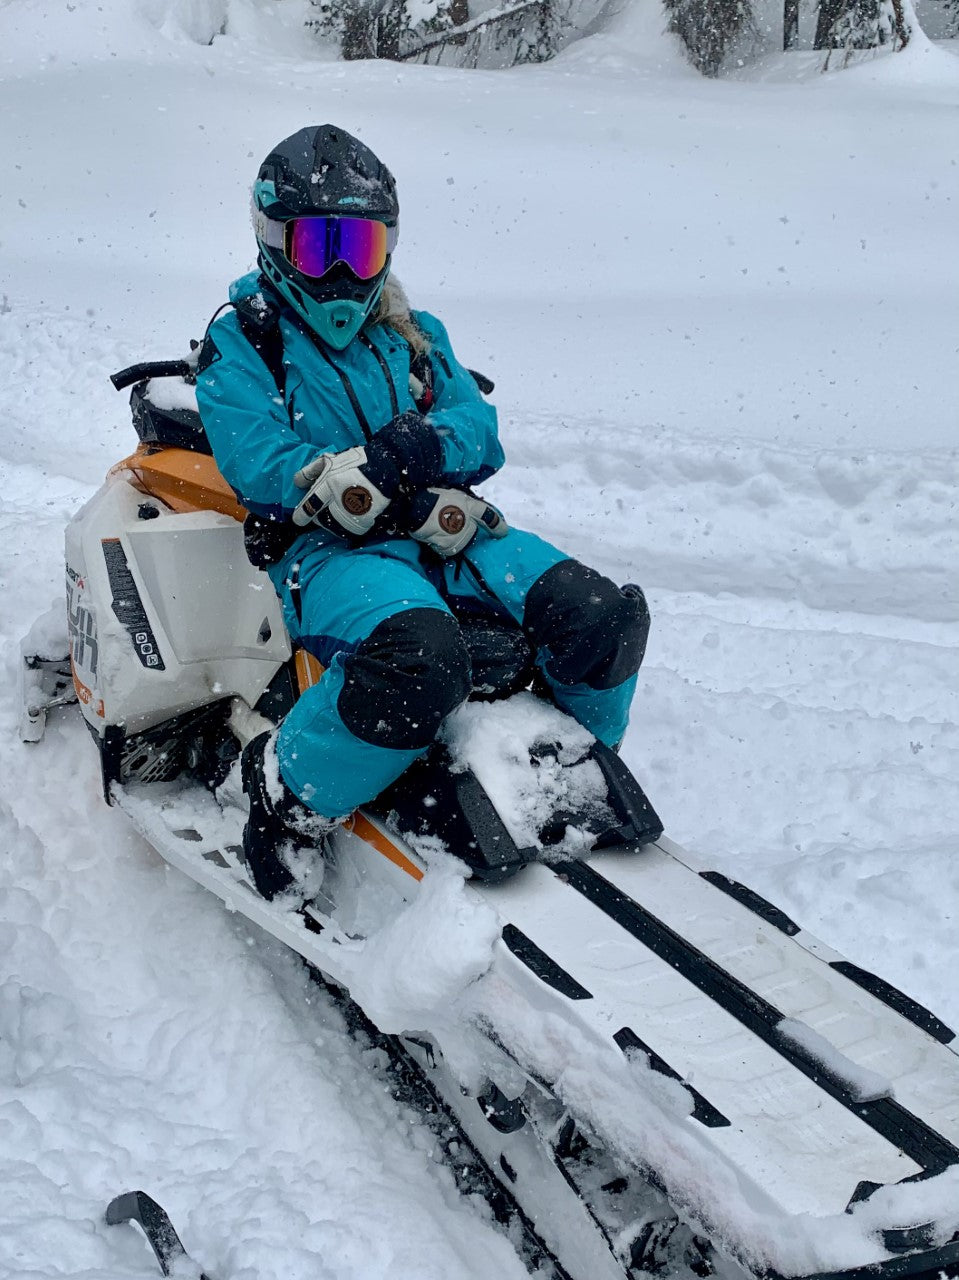 Person seated on a snowmobile against a snowy backdrop, dressed in blue winter clothing and wearing Baist ski gloves, ready for an adventure in the cold with style and comfort.